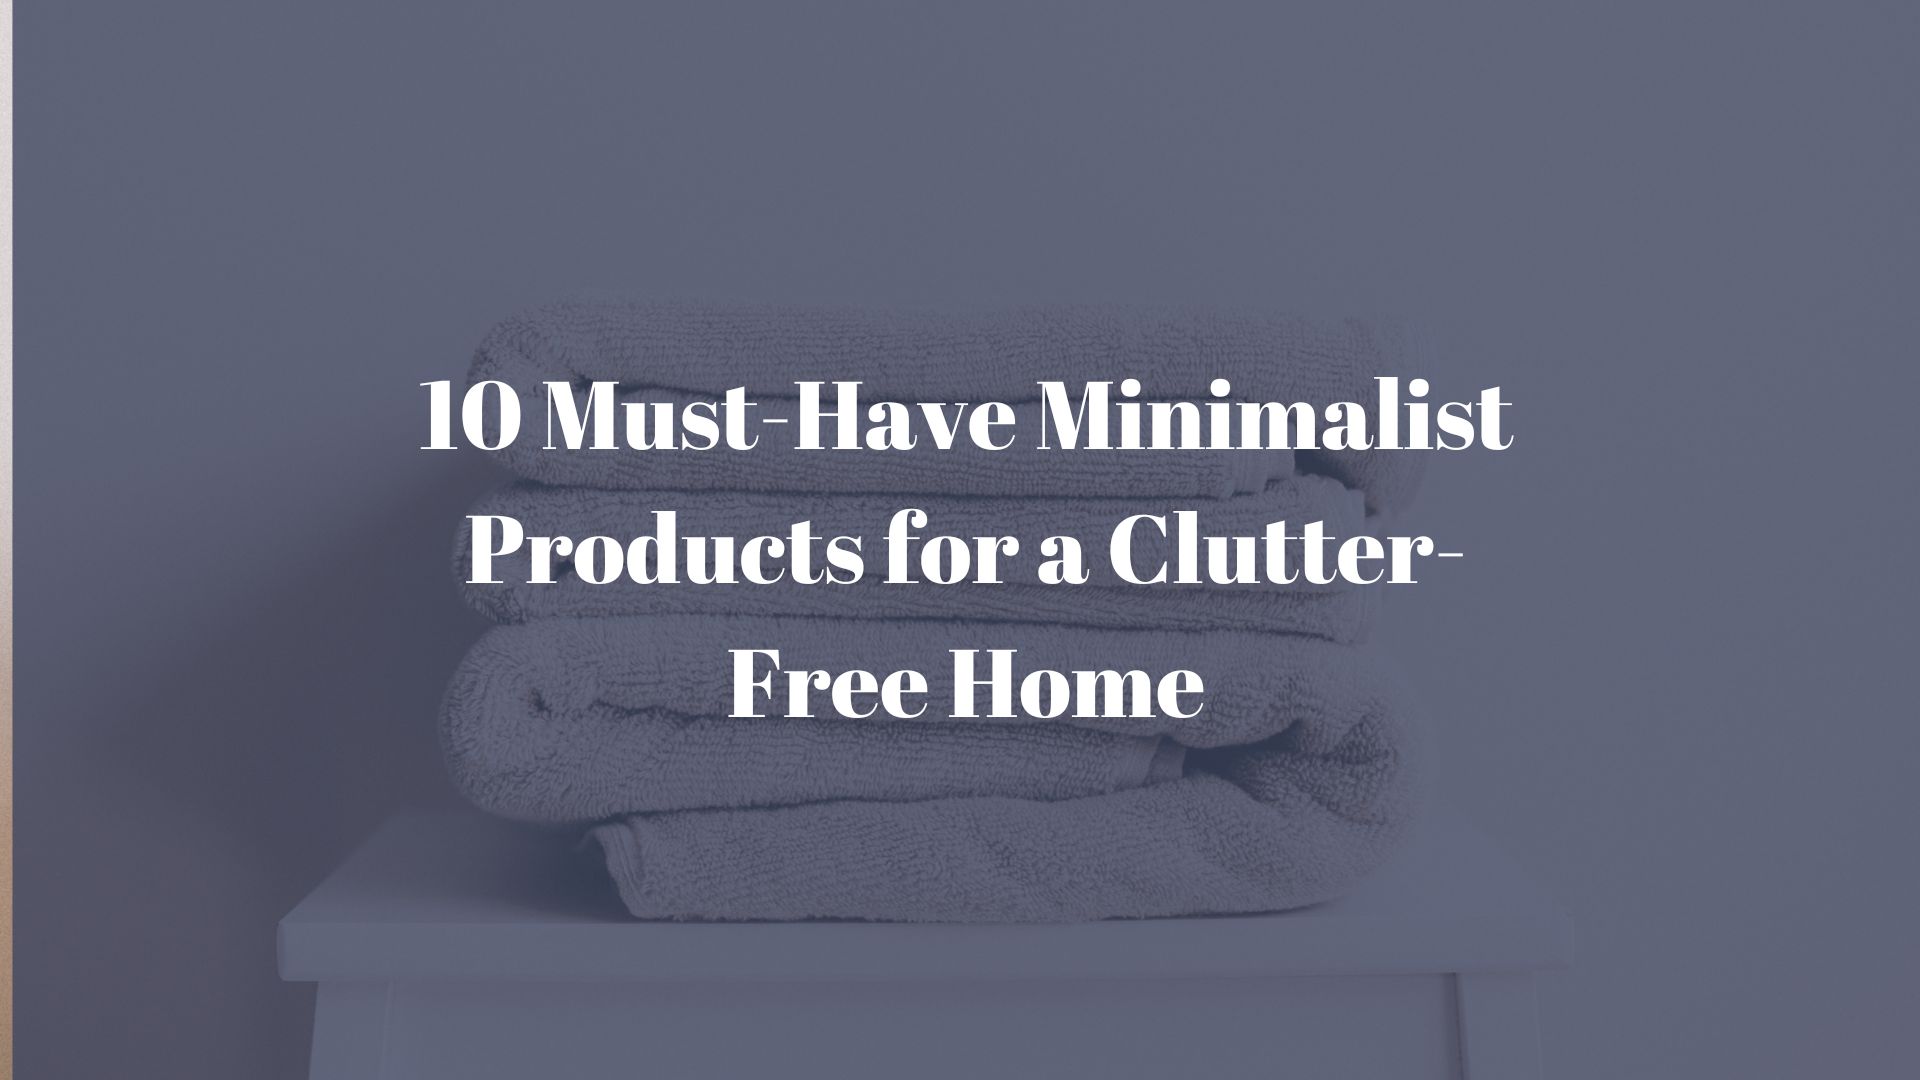 10 Must-Have Minimalist Products for a Clutter-Free Home